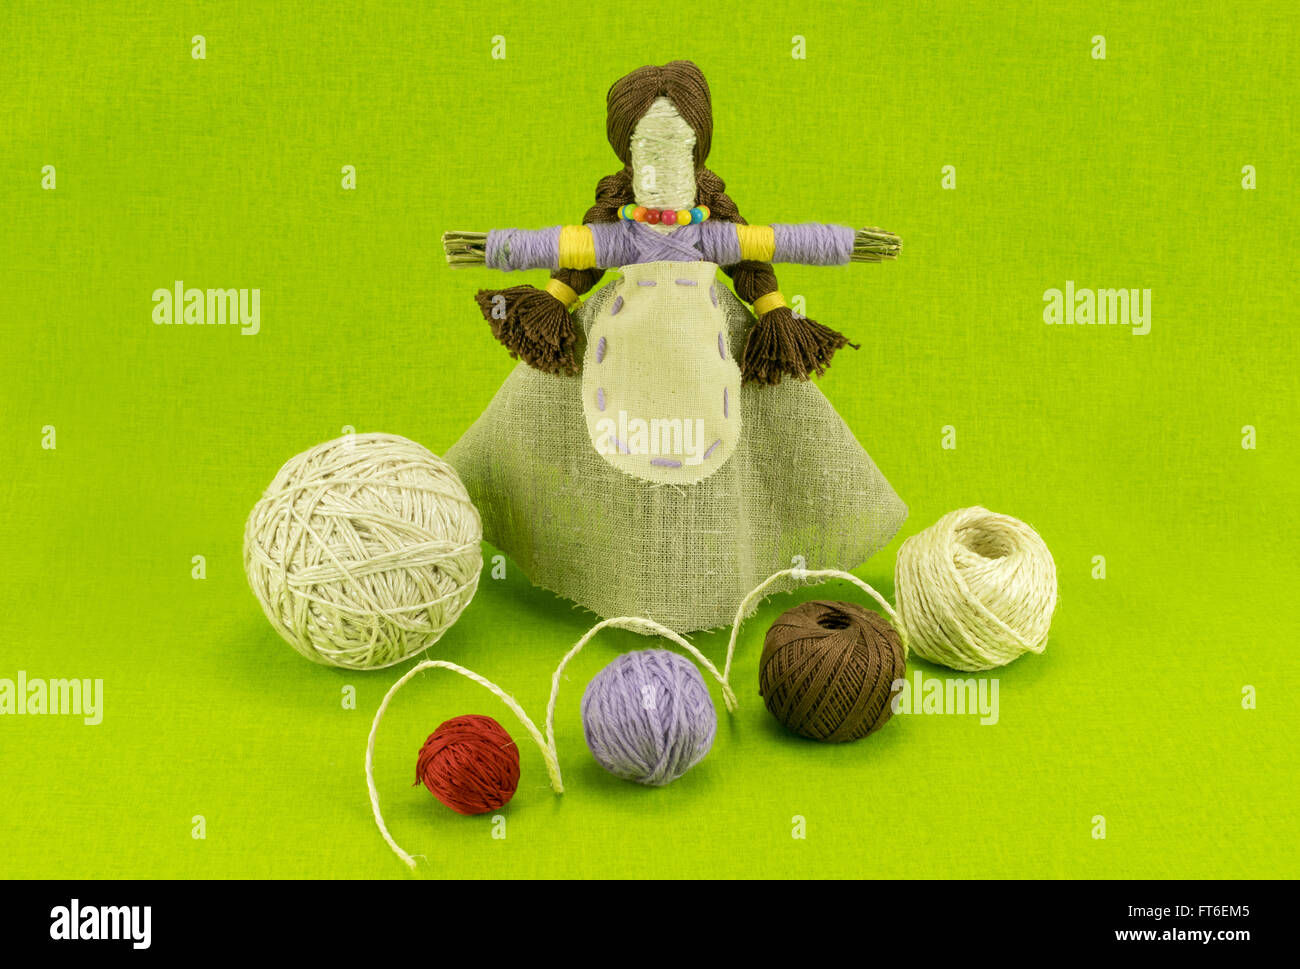 A folk handmade doll made of straw, linen and balls of wool Stock Photo